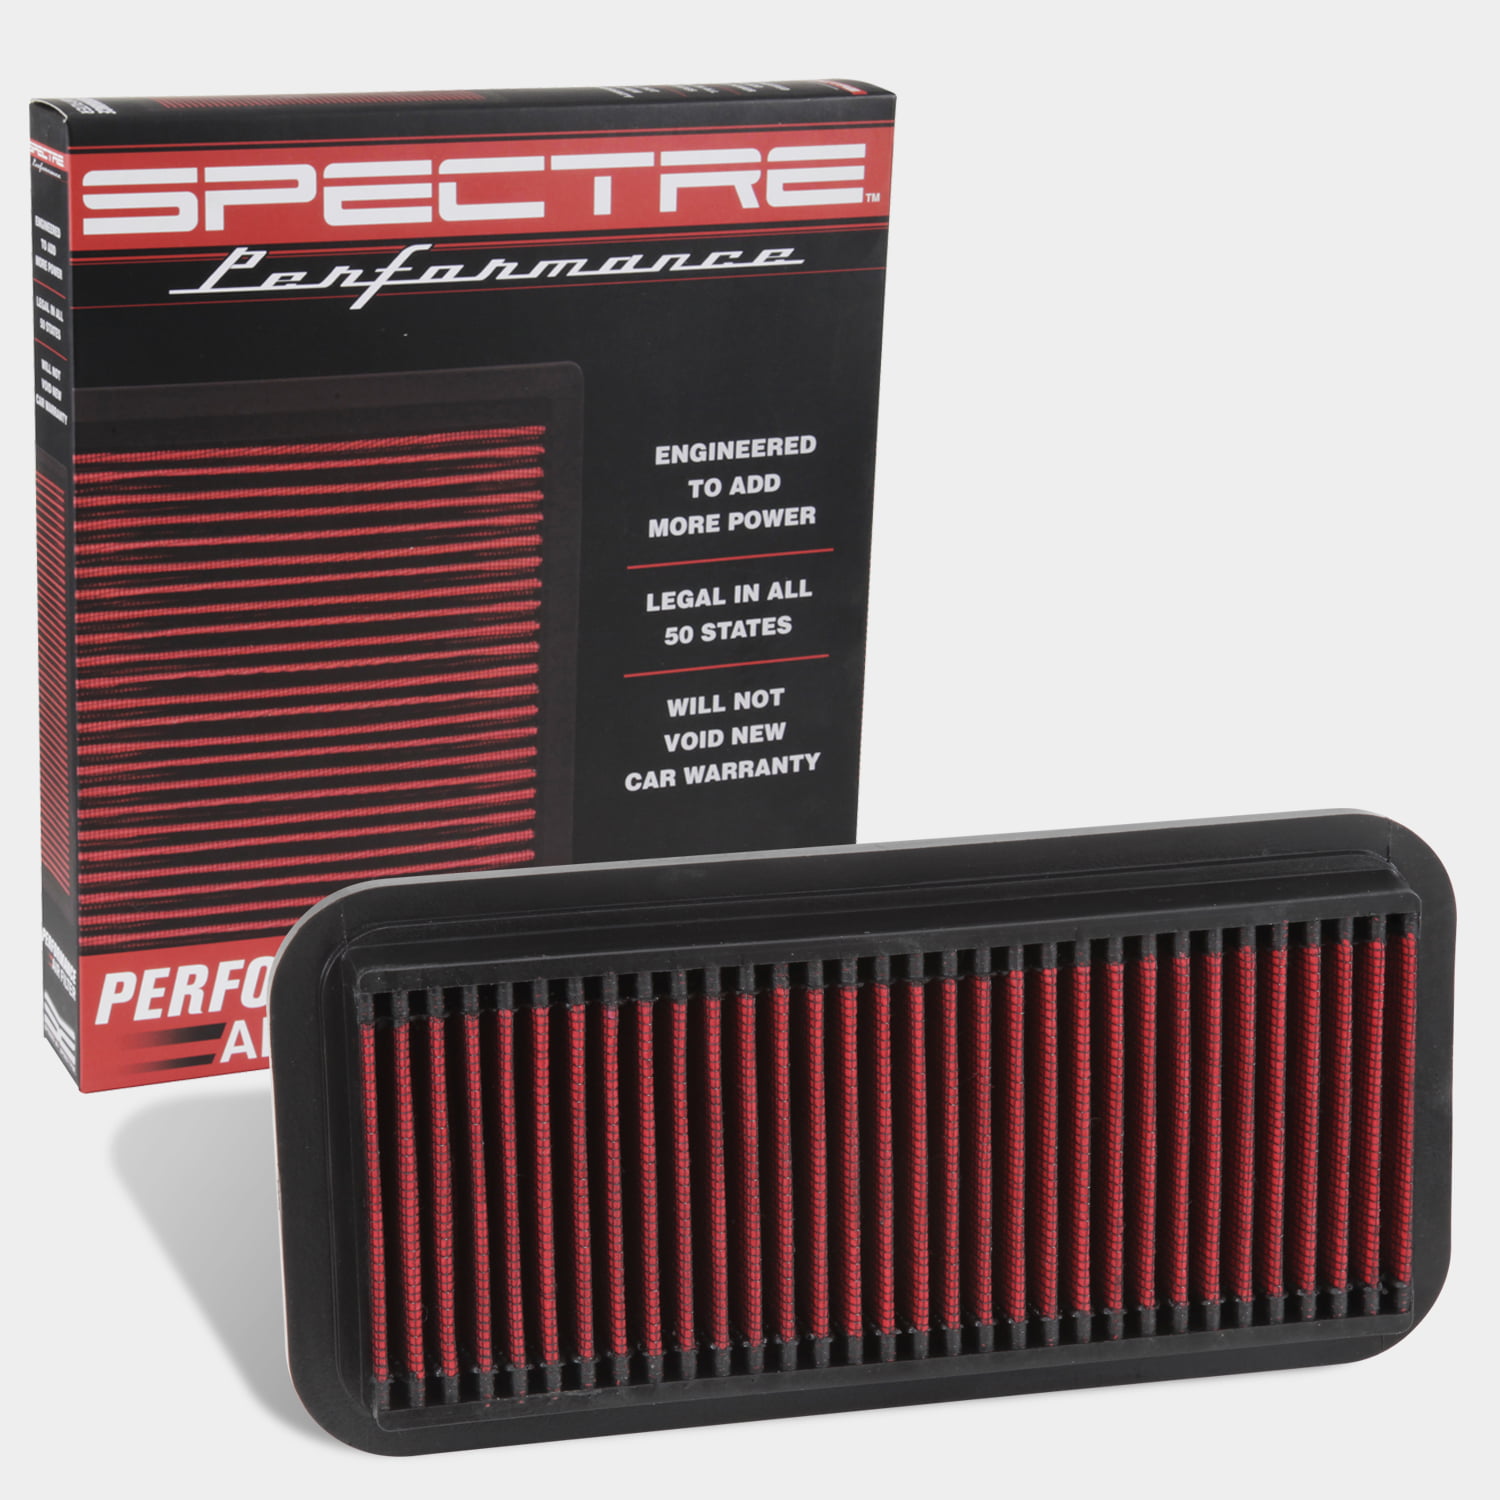 Washable Spectre Engine Air Filter: High Performance See Description for Fitment Information Replacement Filter: Fits Select1972-2002 CHRYSLER/PLYMOUTH/VOLKSWAGEN/AUDI Vehicles SPE-HPR3660